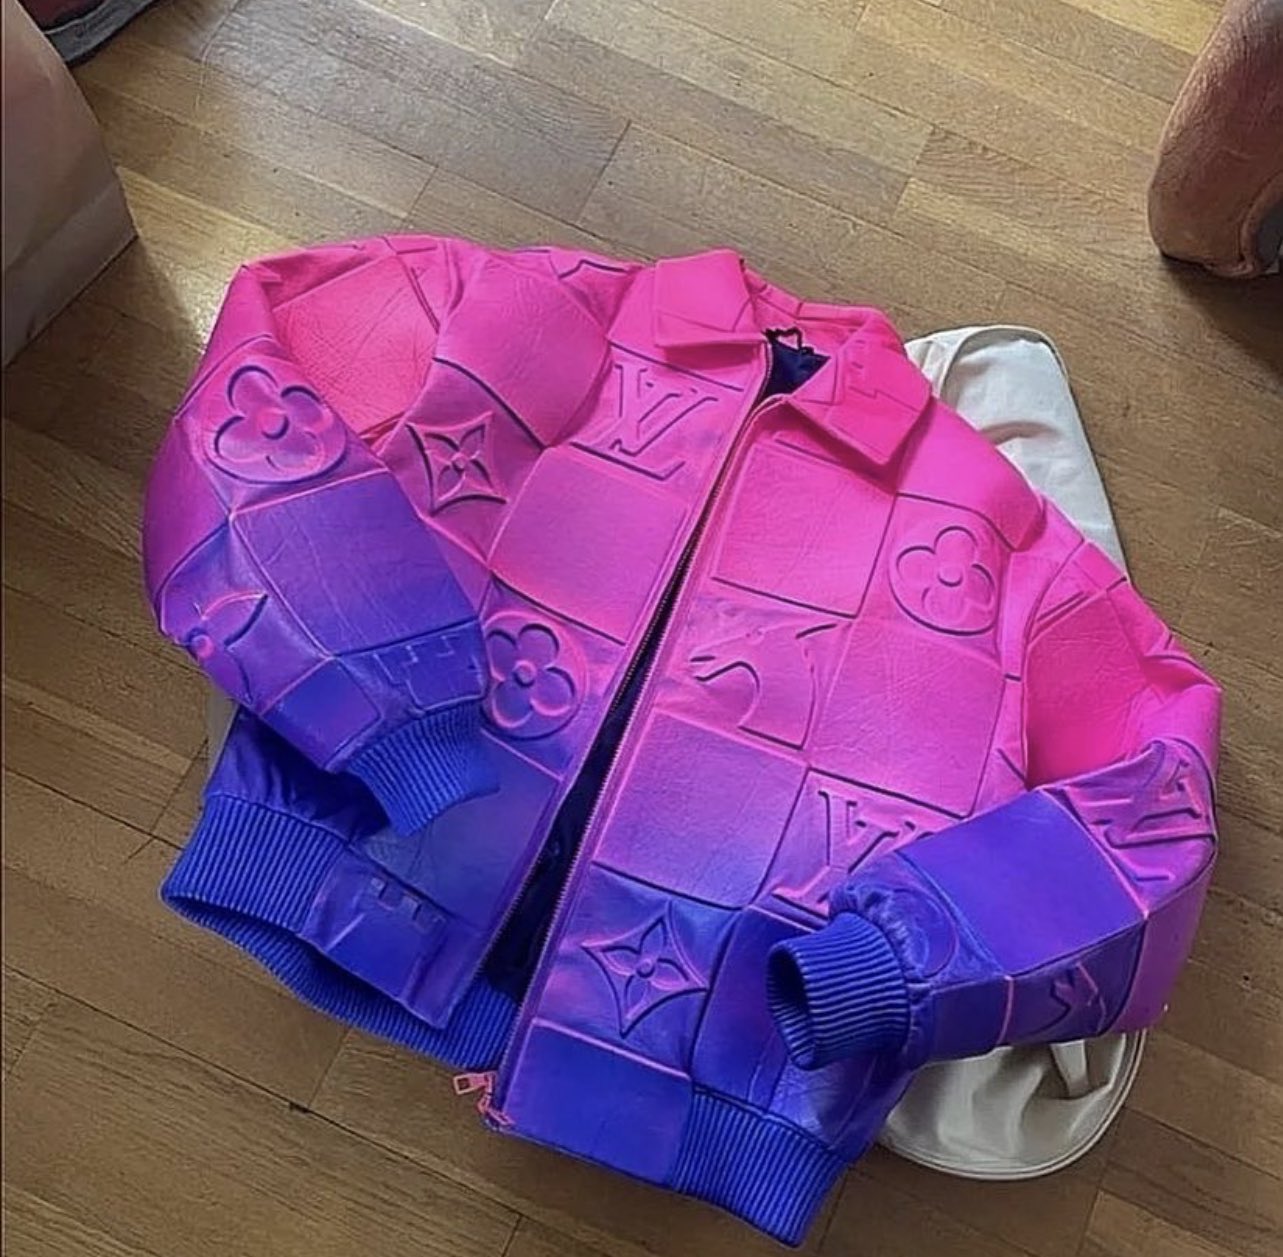 1/1 Louis Vuitton jacket gifted to Clint (@clint419) by Virgil Abloh 💞  What do you think of this jacket? Let us know in the…